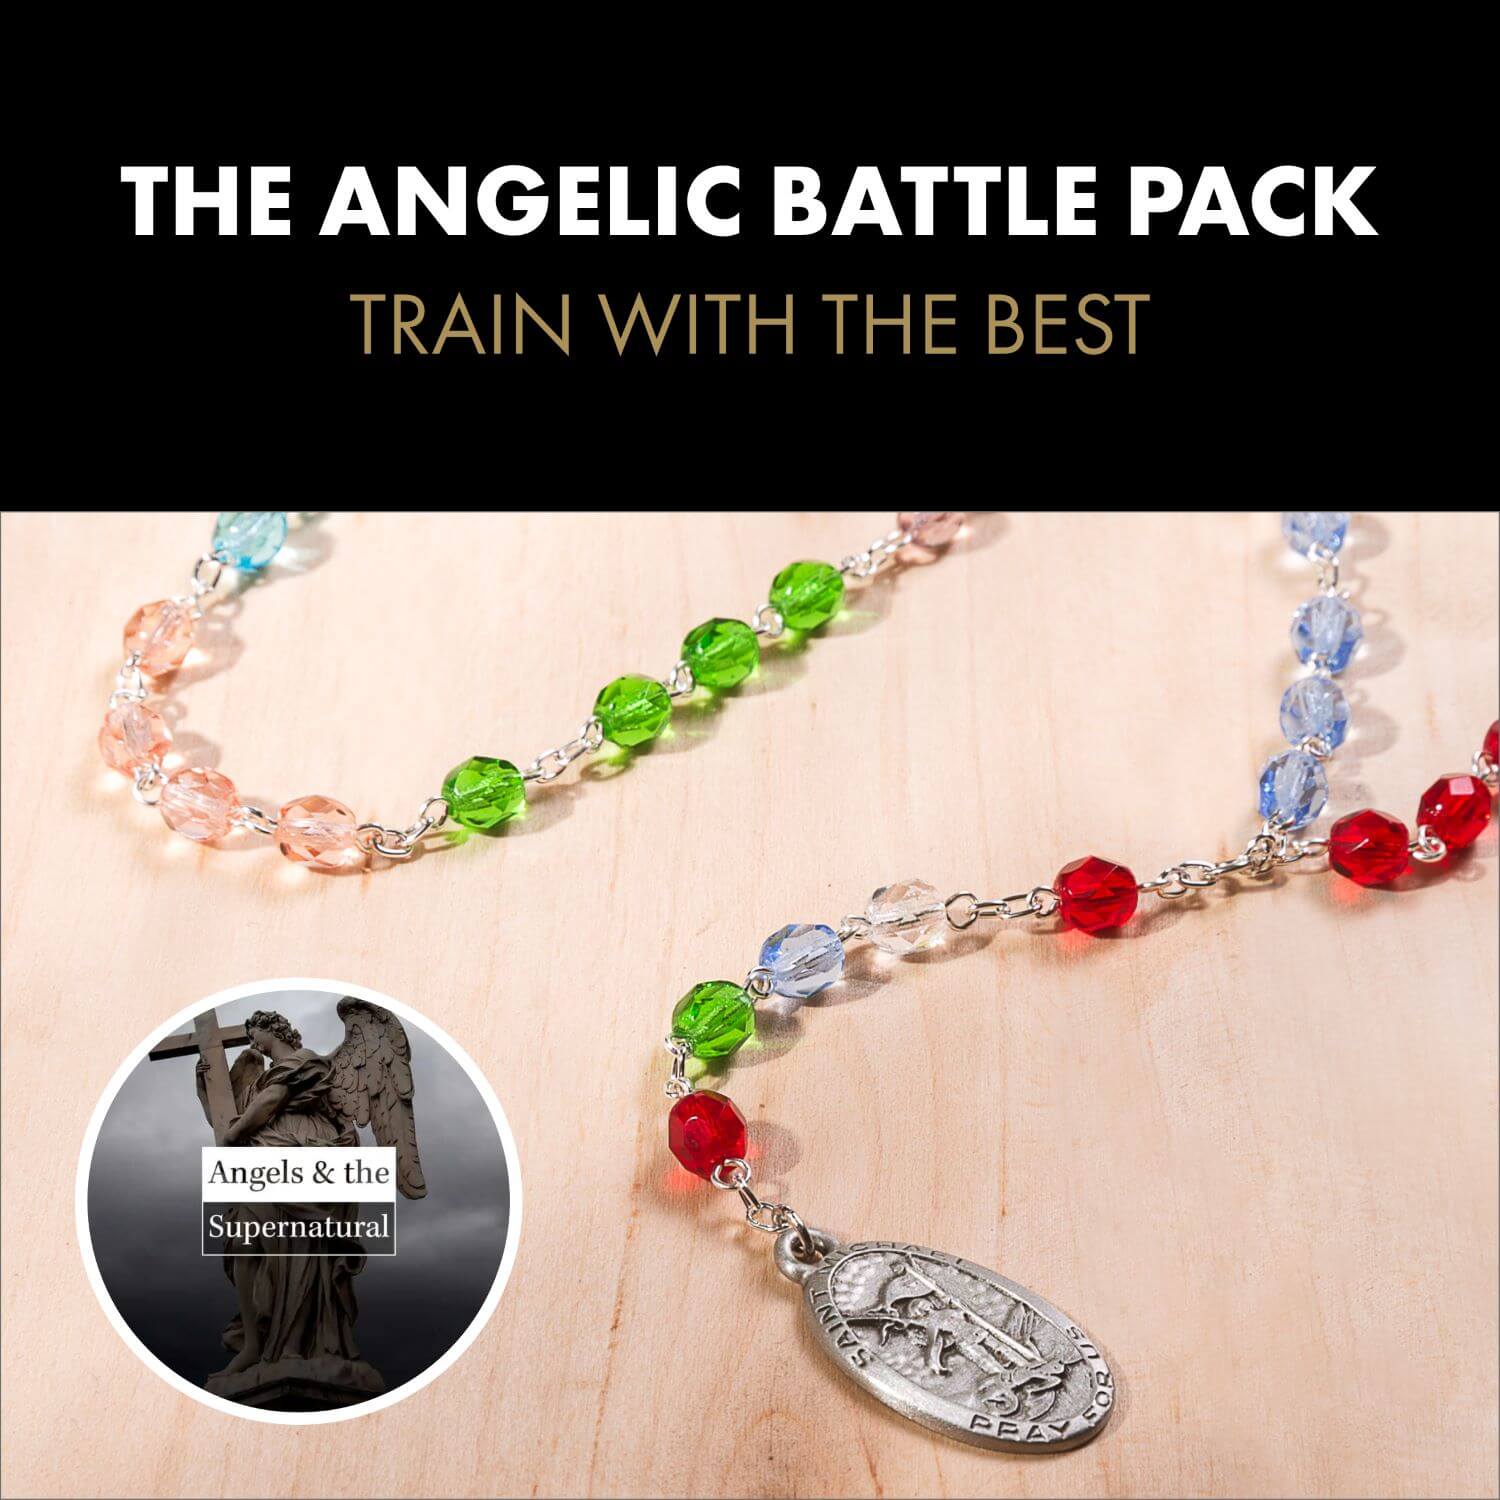 The Angelic Battle Pack